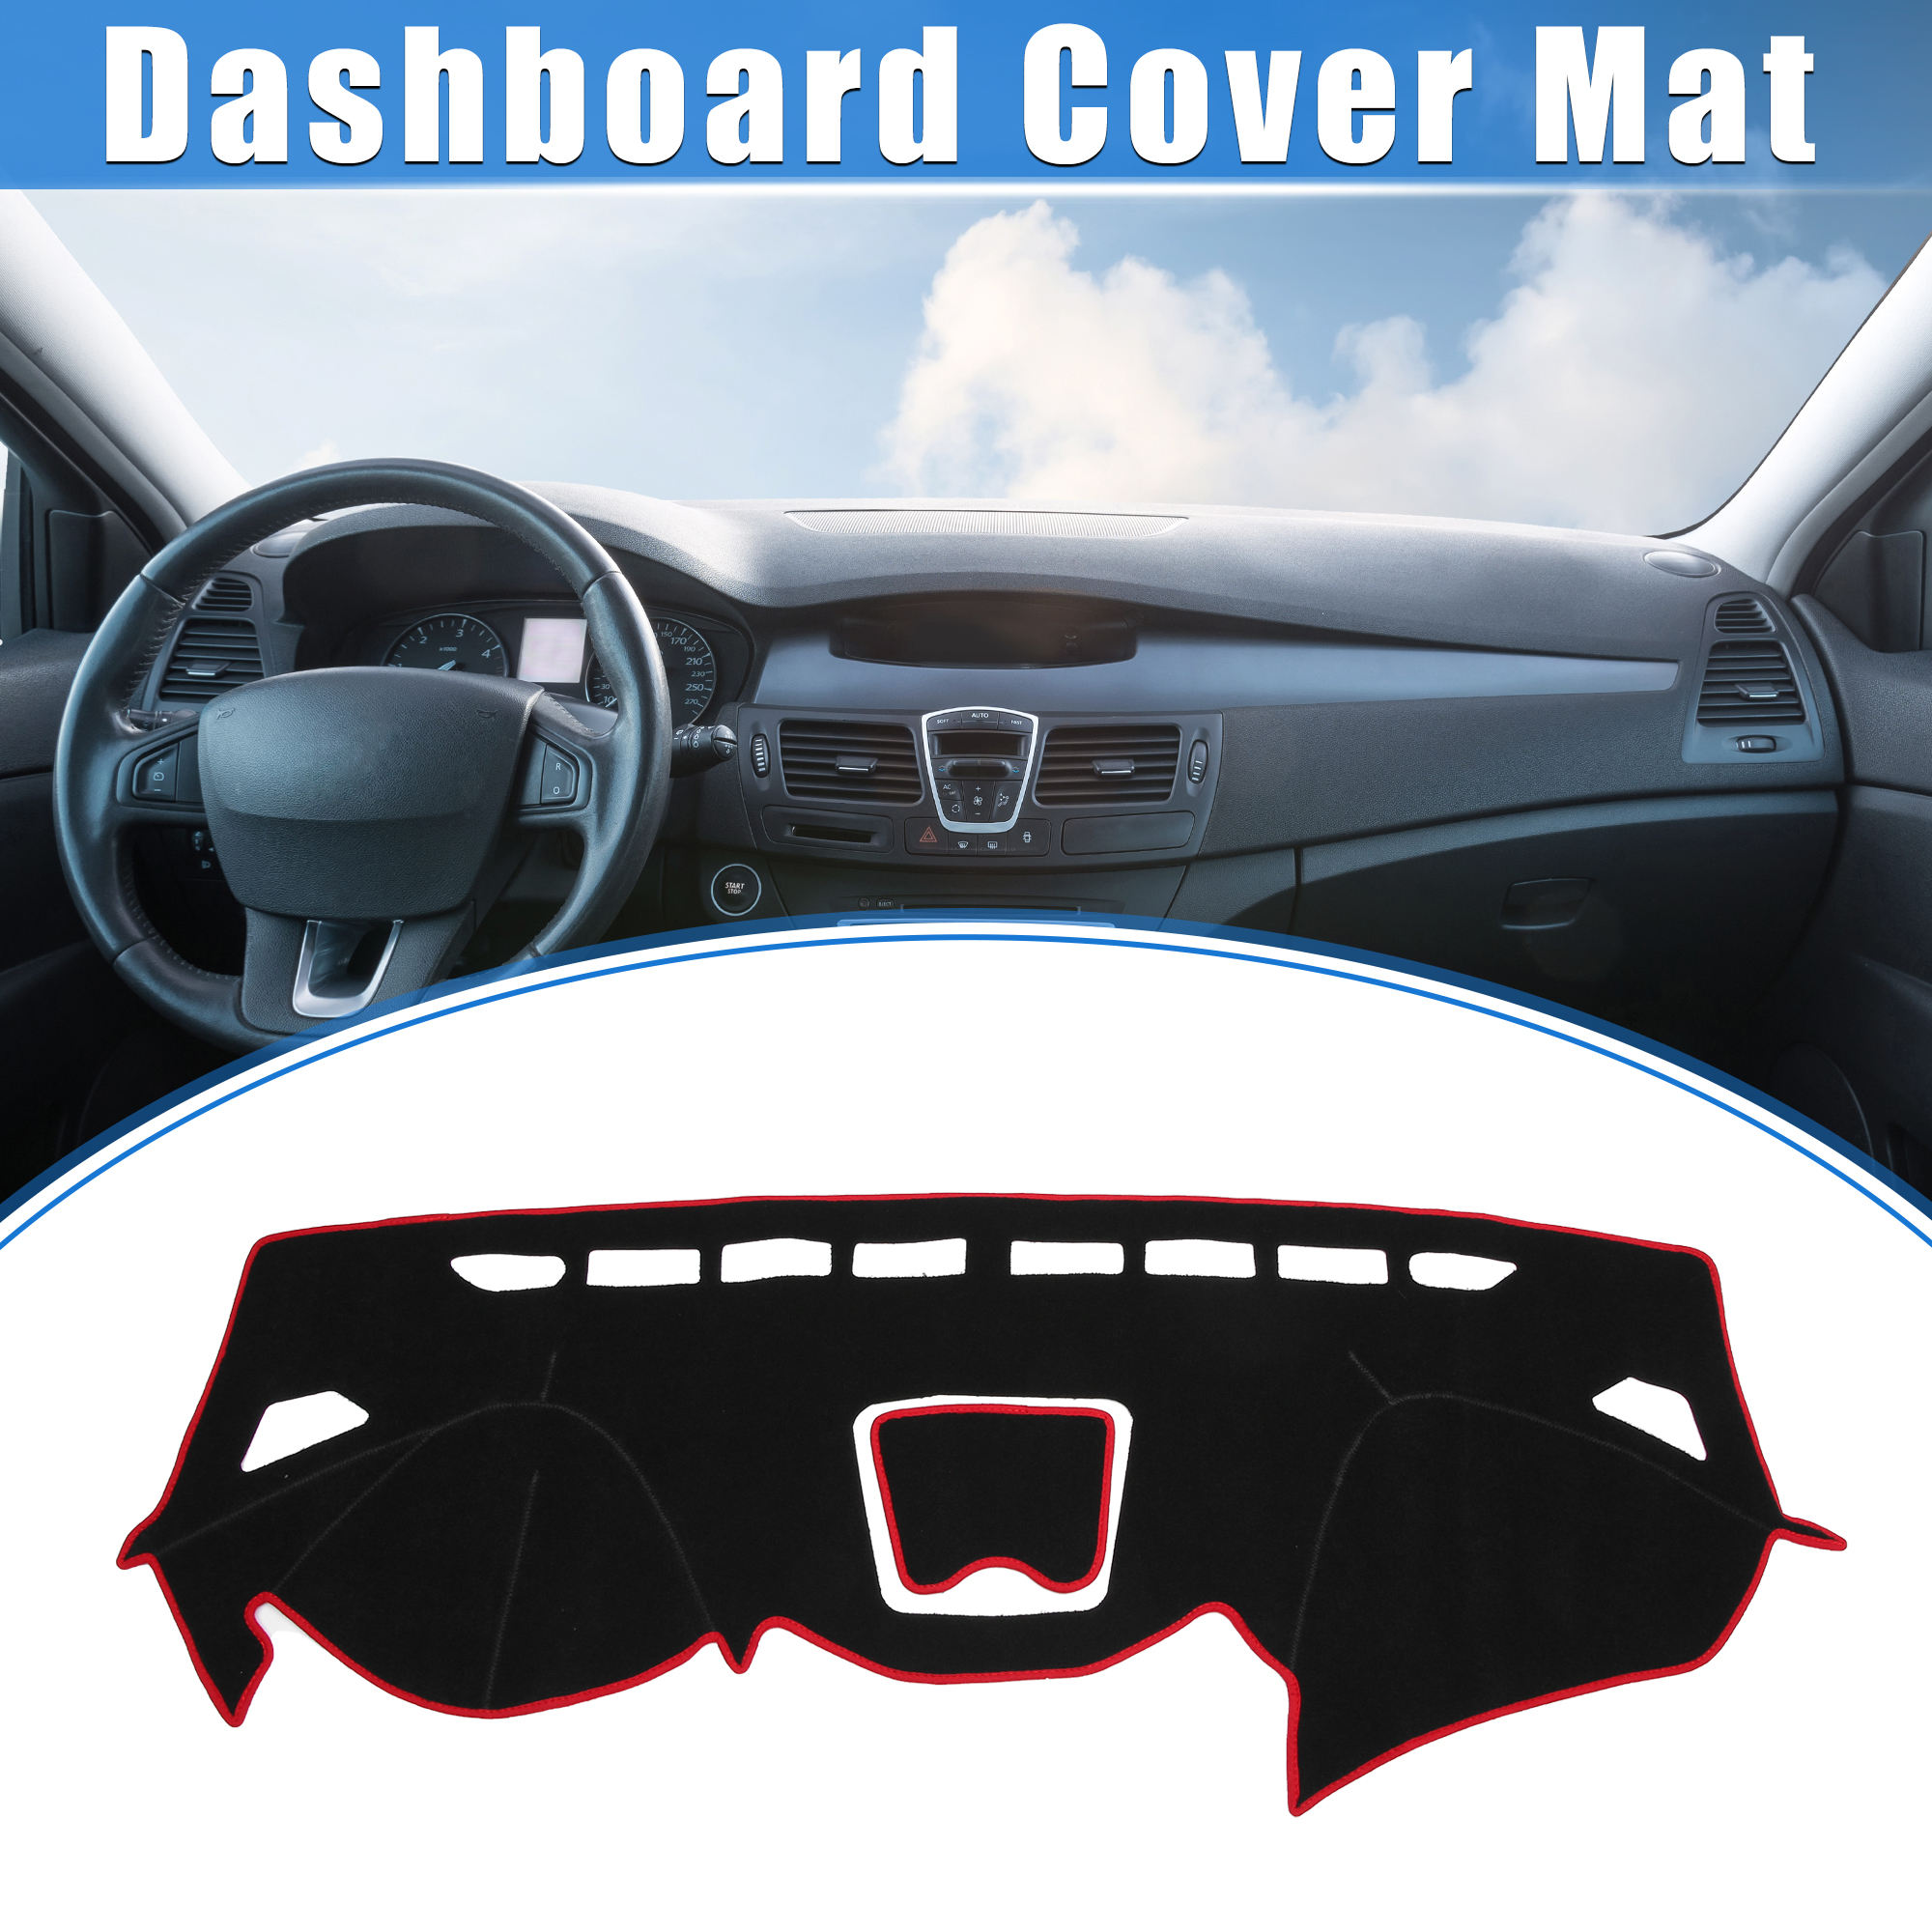 Unique Bargains Dashboard Cover Protector Mat for Hyundai Santa Fe 2013-2018 Polyester Black Red